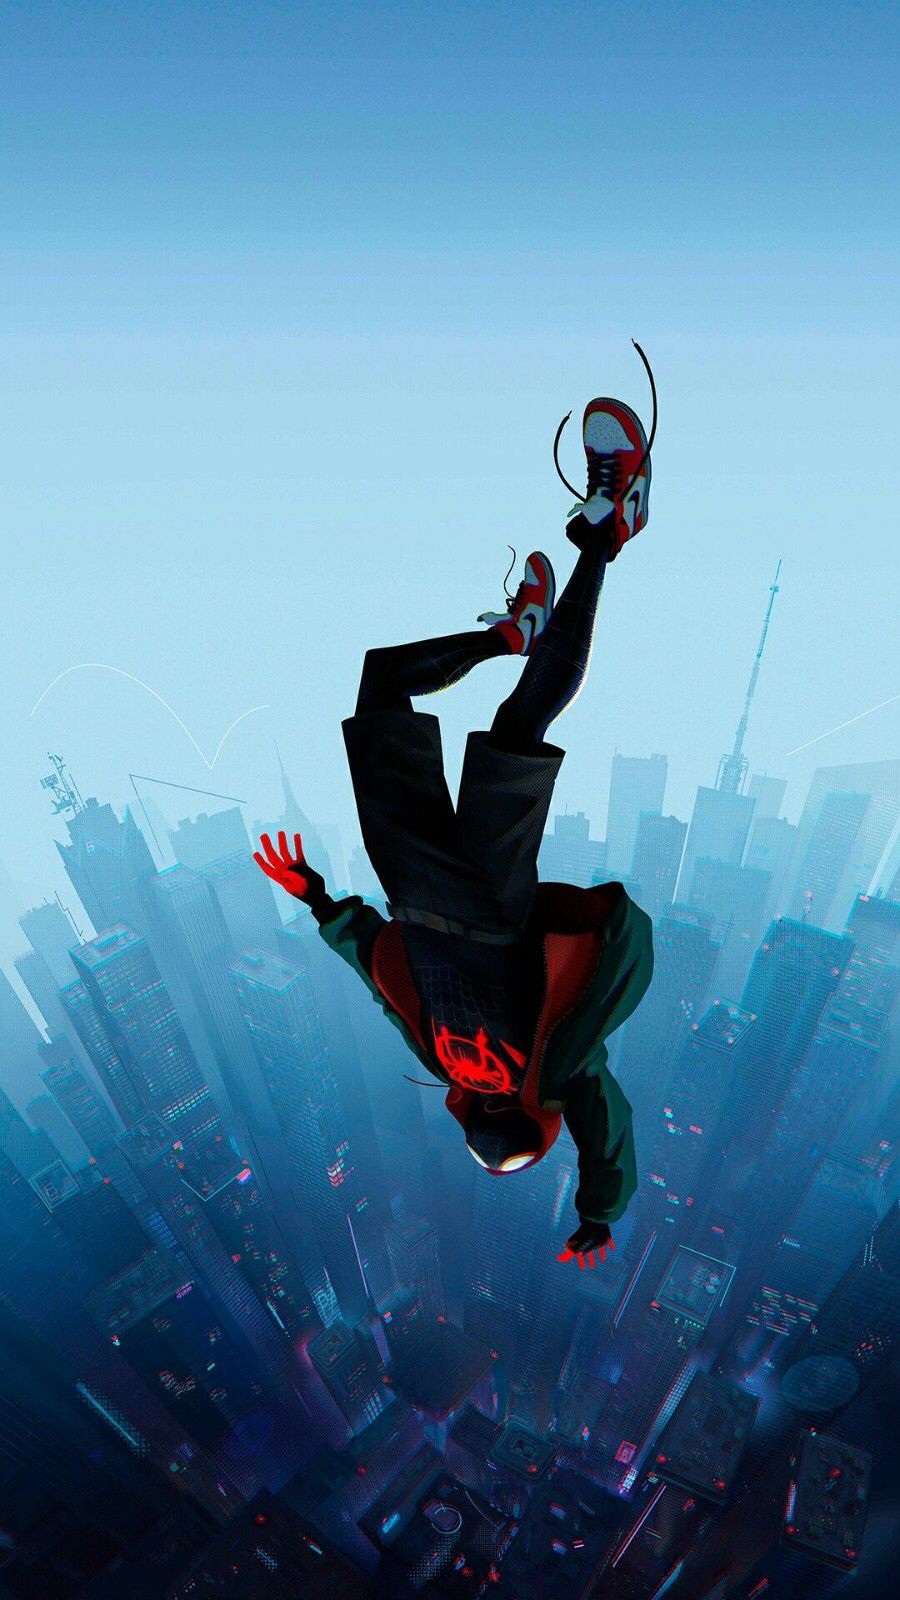 spiderman live wallpaper,extreme sport,air sports,recreation,photography,adventure